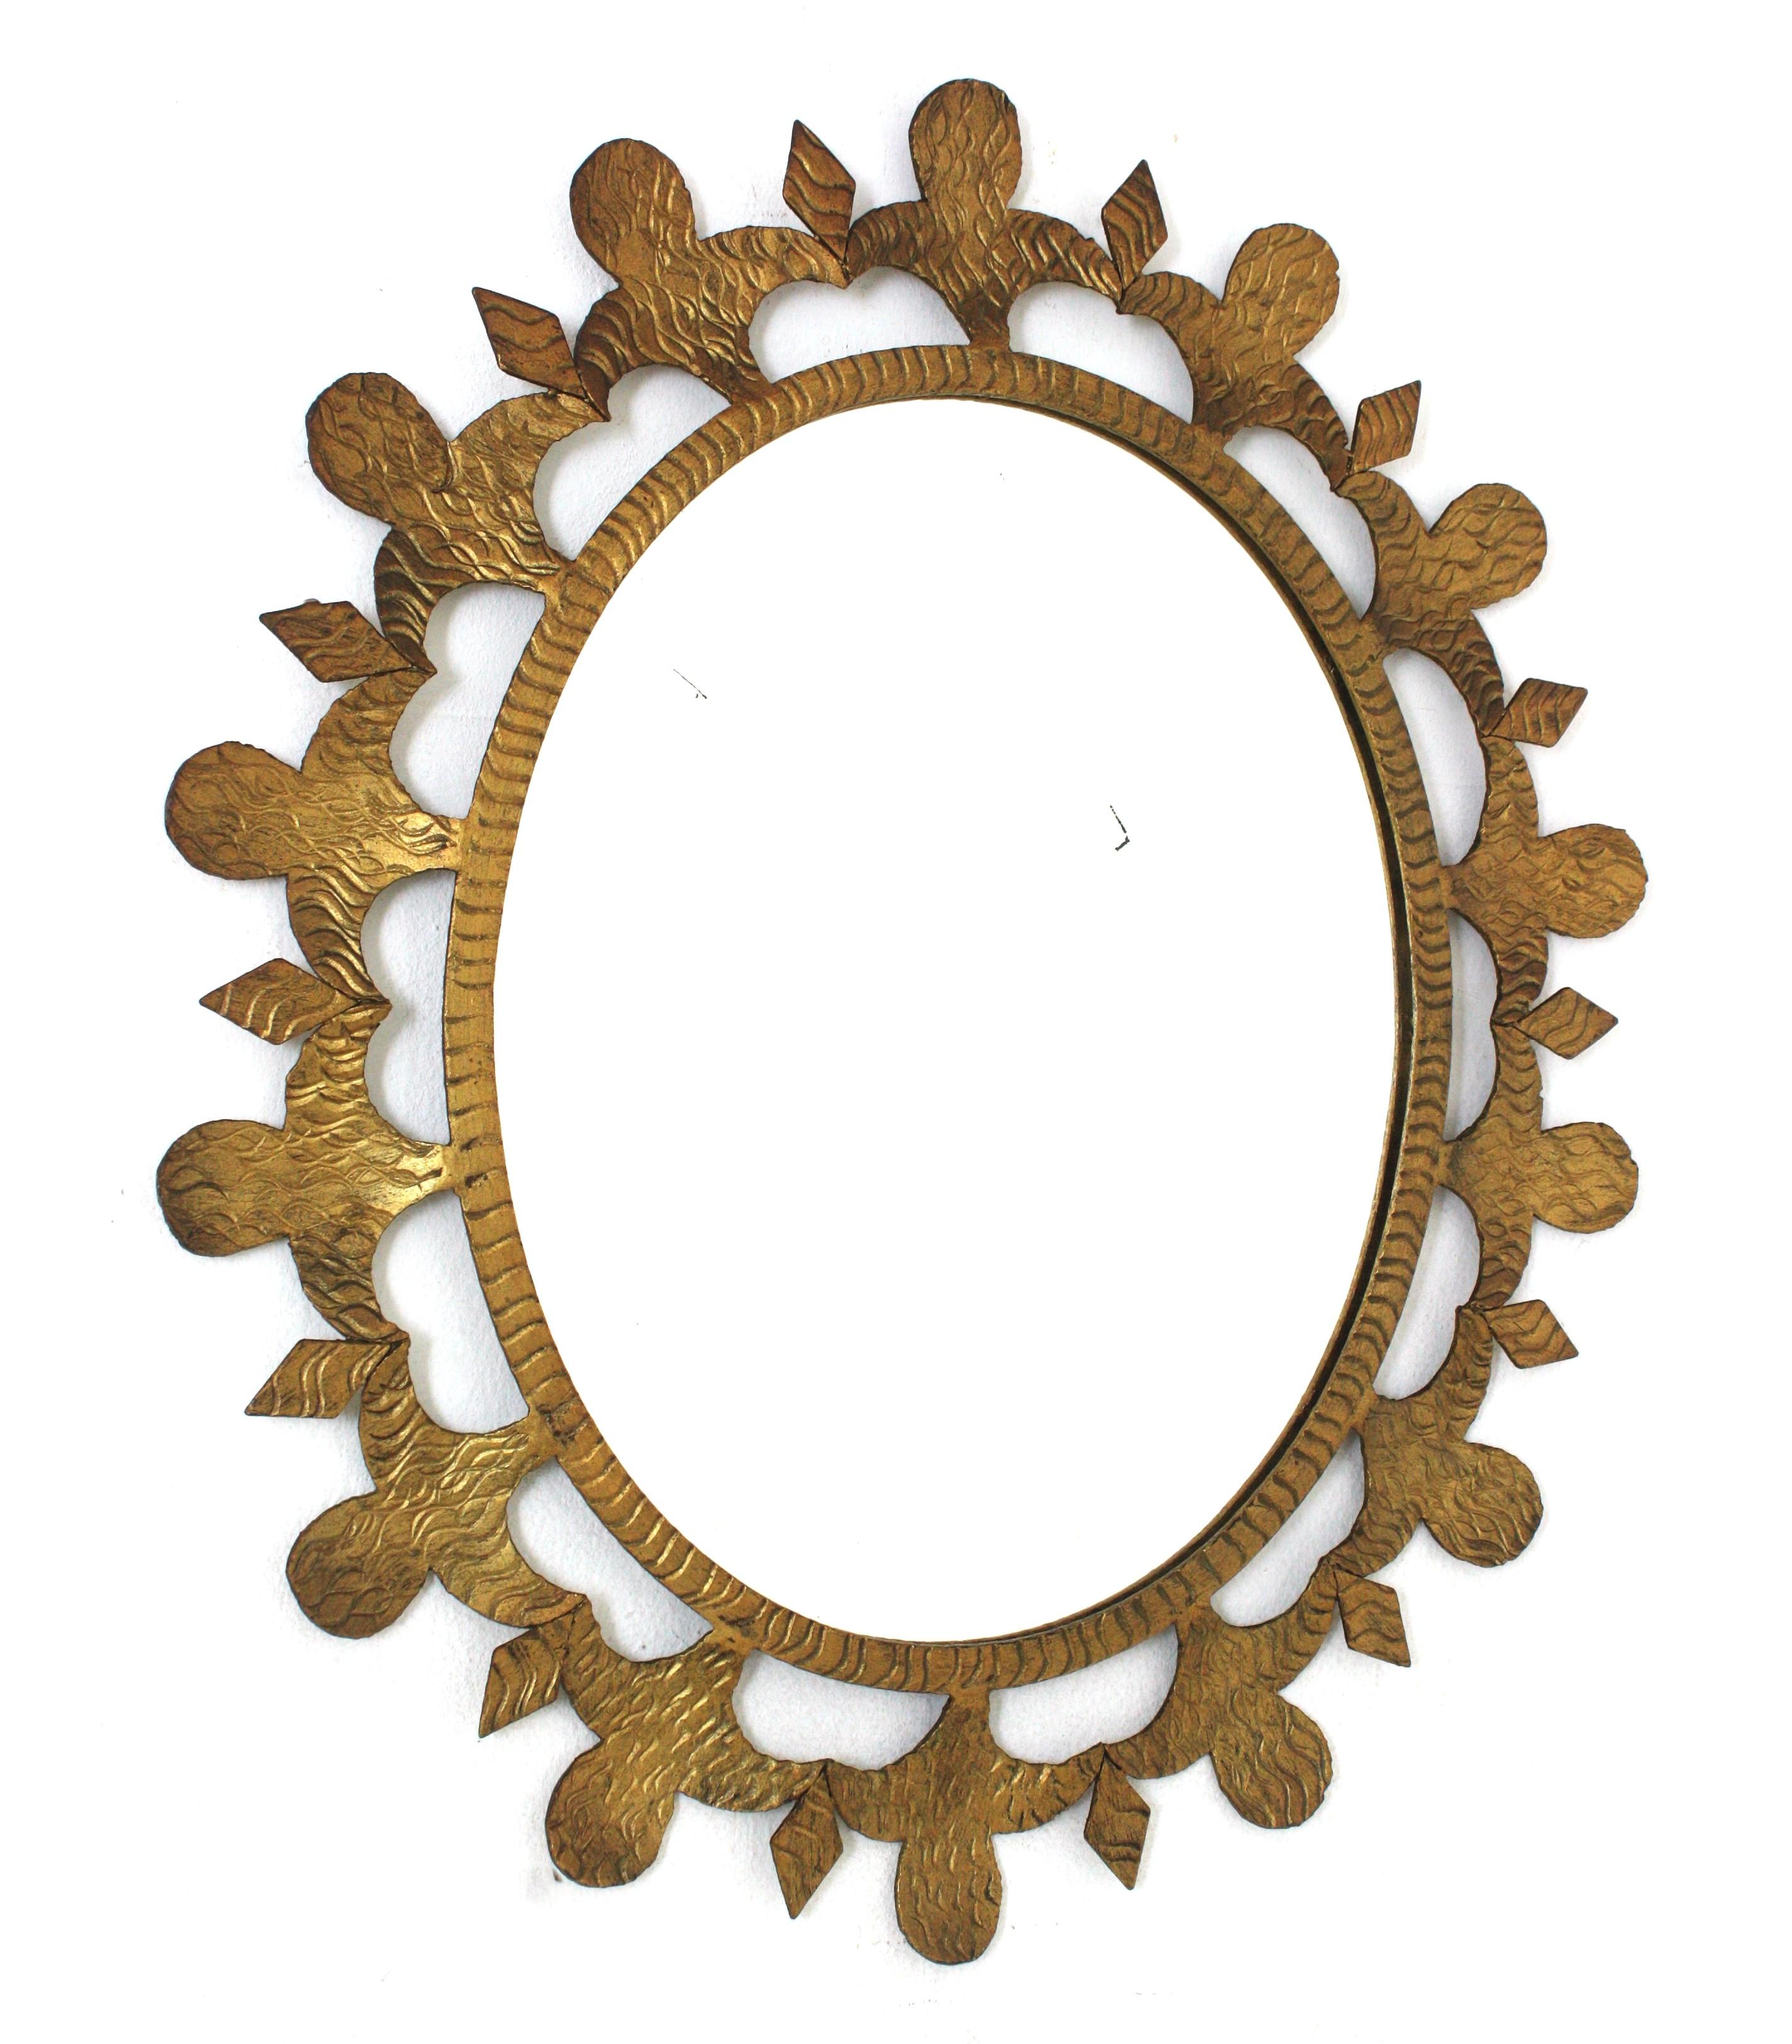 Gilt Oval Mirror, Wrought Iron
Wrought Iron Oval Sunburst Mirror with Scroll Details and Brutalist Design, France, 1950-1960.
Eye-catching hand forged iron mirror with scroll decorations, fleur-de-lis accents and oval shape.
This beautiful oval